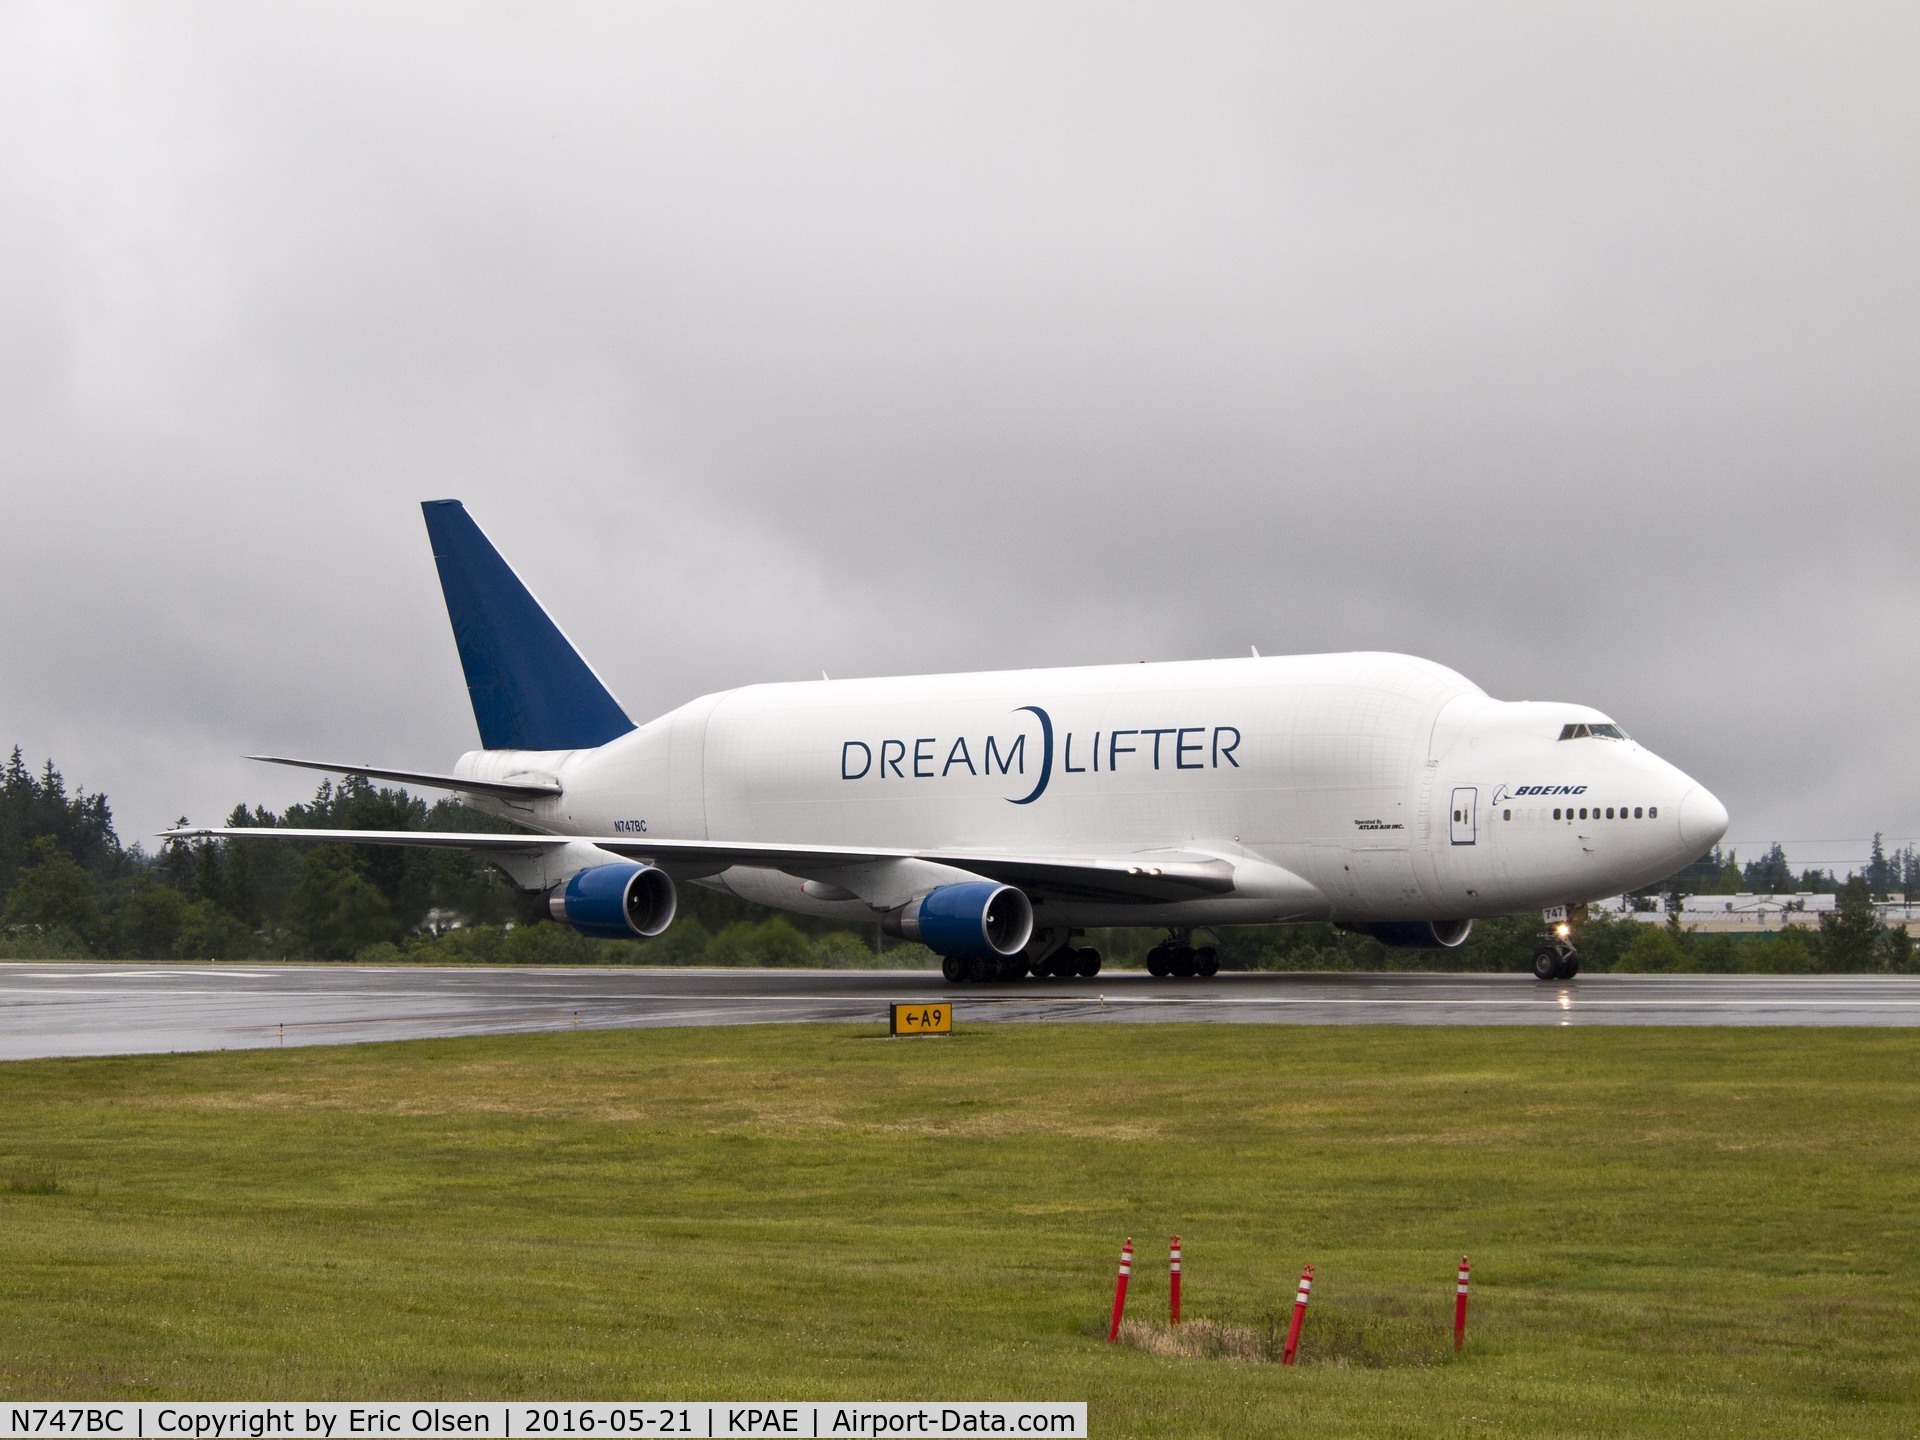 N747BC, 1992 Boeing 747-4J6 C/N 25879, The Dream Lifter at KPAE taxing North.